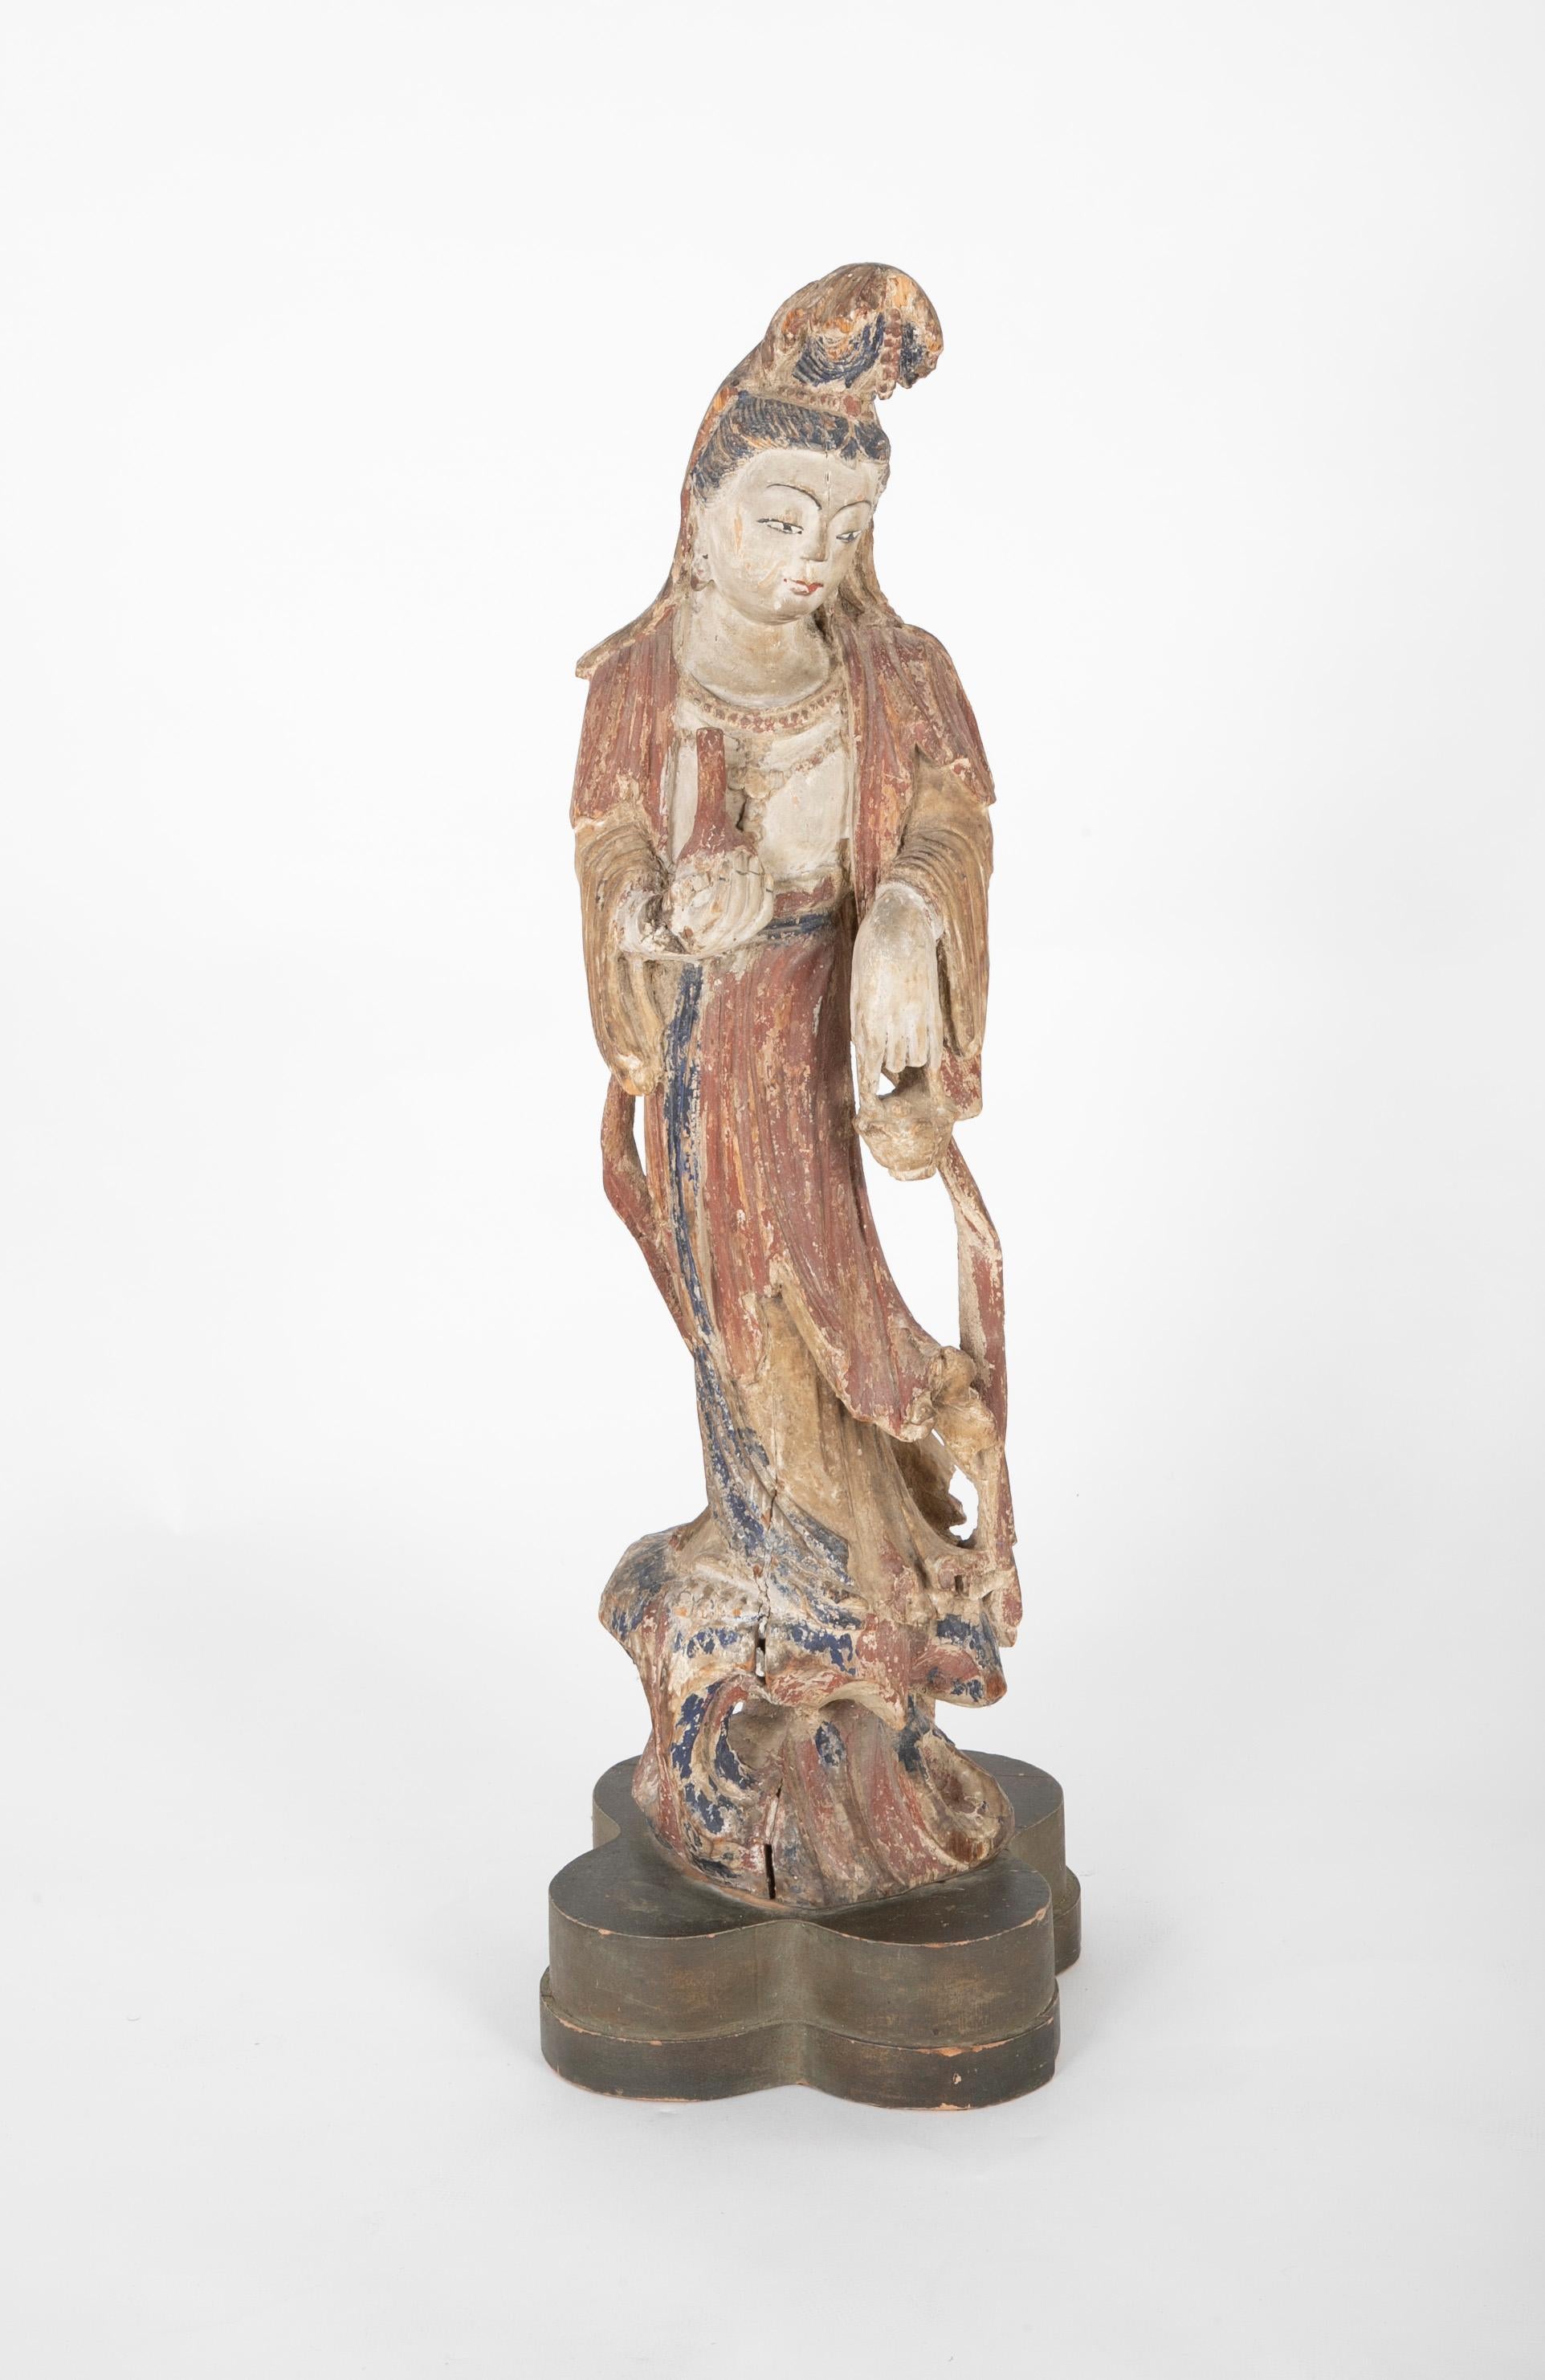 Beautiful carving of Guanyin, shown standing on a rocky outcrop, mounted on a lobed wooden base. It was once used as a lamp, and can be rewired. Nice faded painted surface. 

Guanyin is the Buddhist bodhisattva associated with compassion. She was